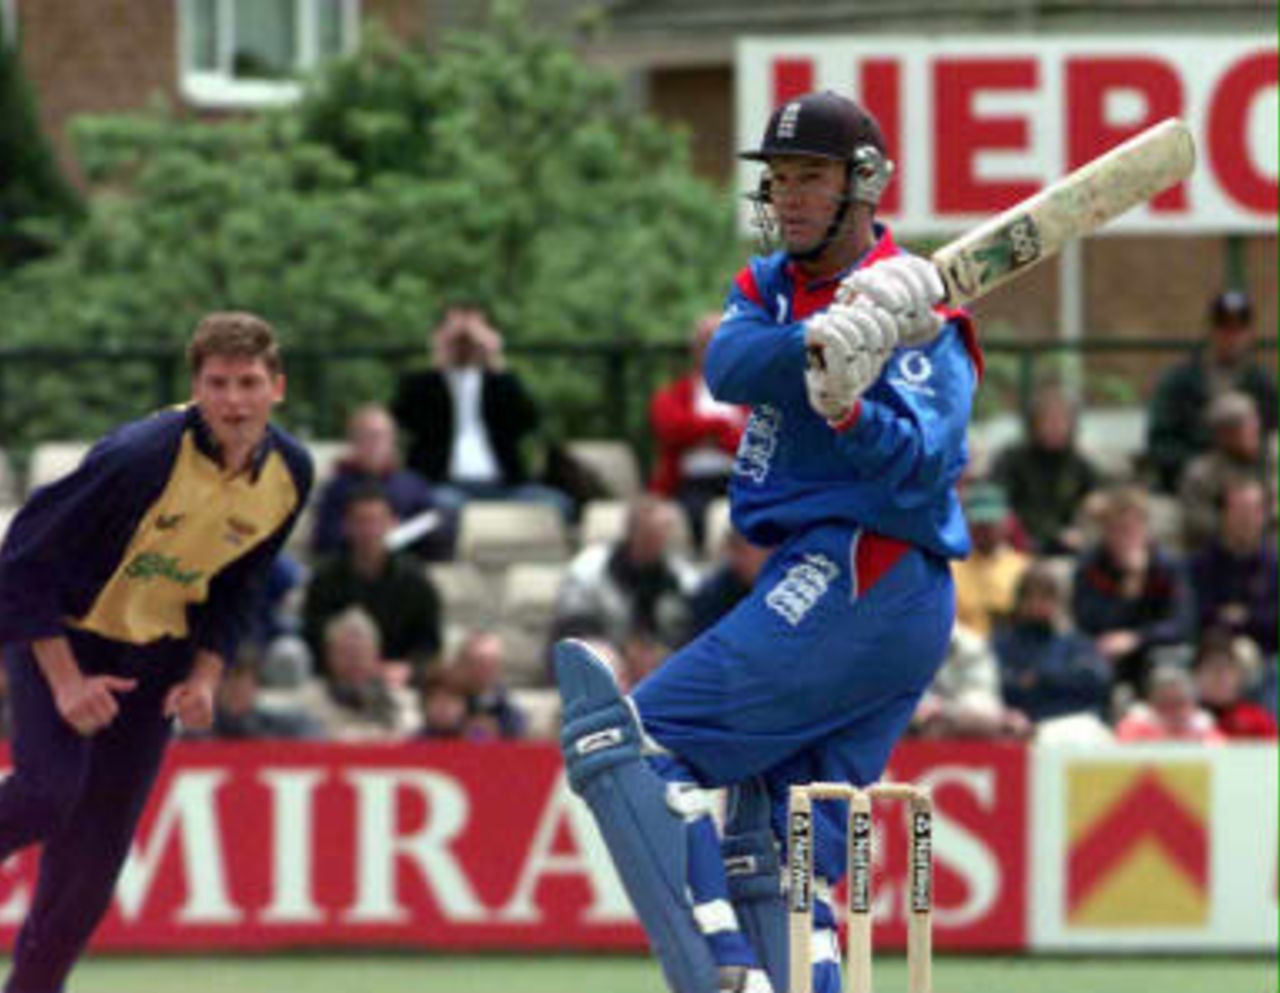 Hick hooks Hampshire's Simon Renshaw  - World Cup warm-up game between Hampshire  and England at Southampton 11 May 1999.